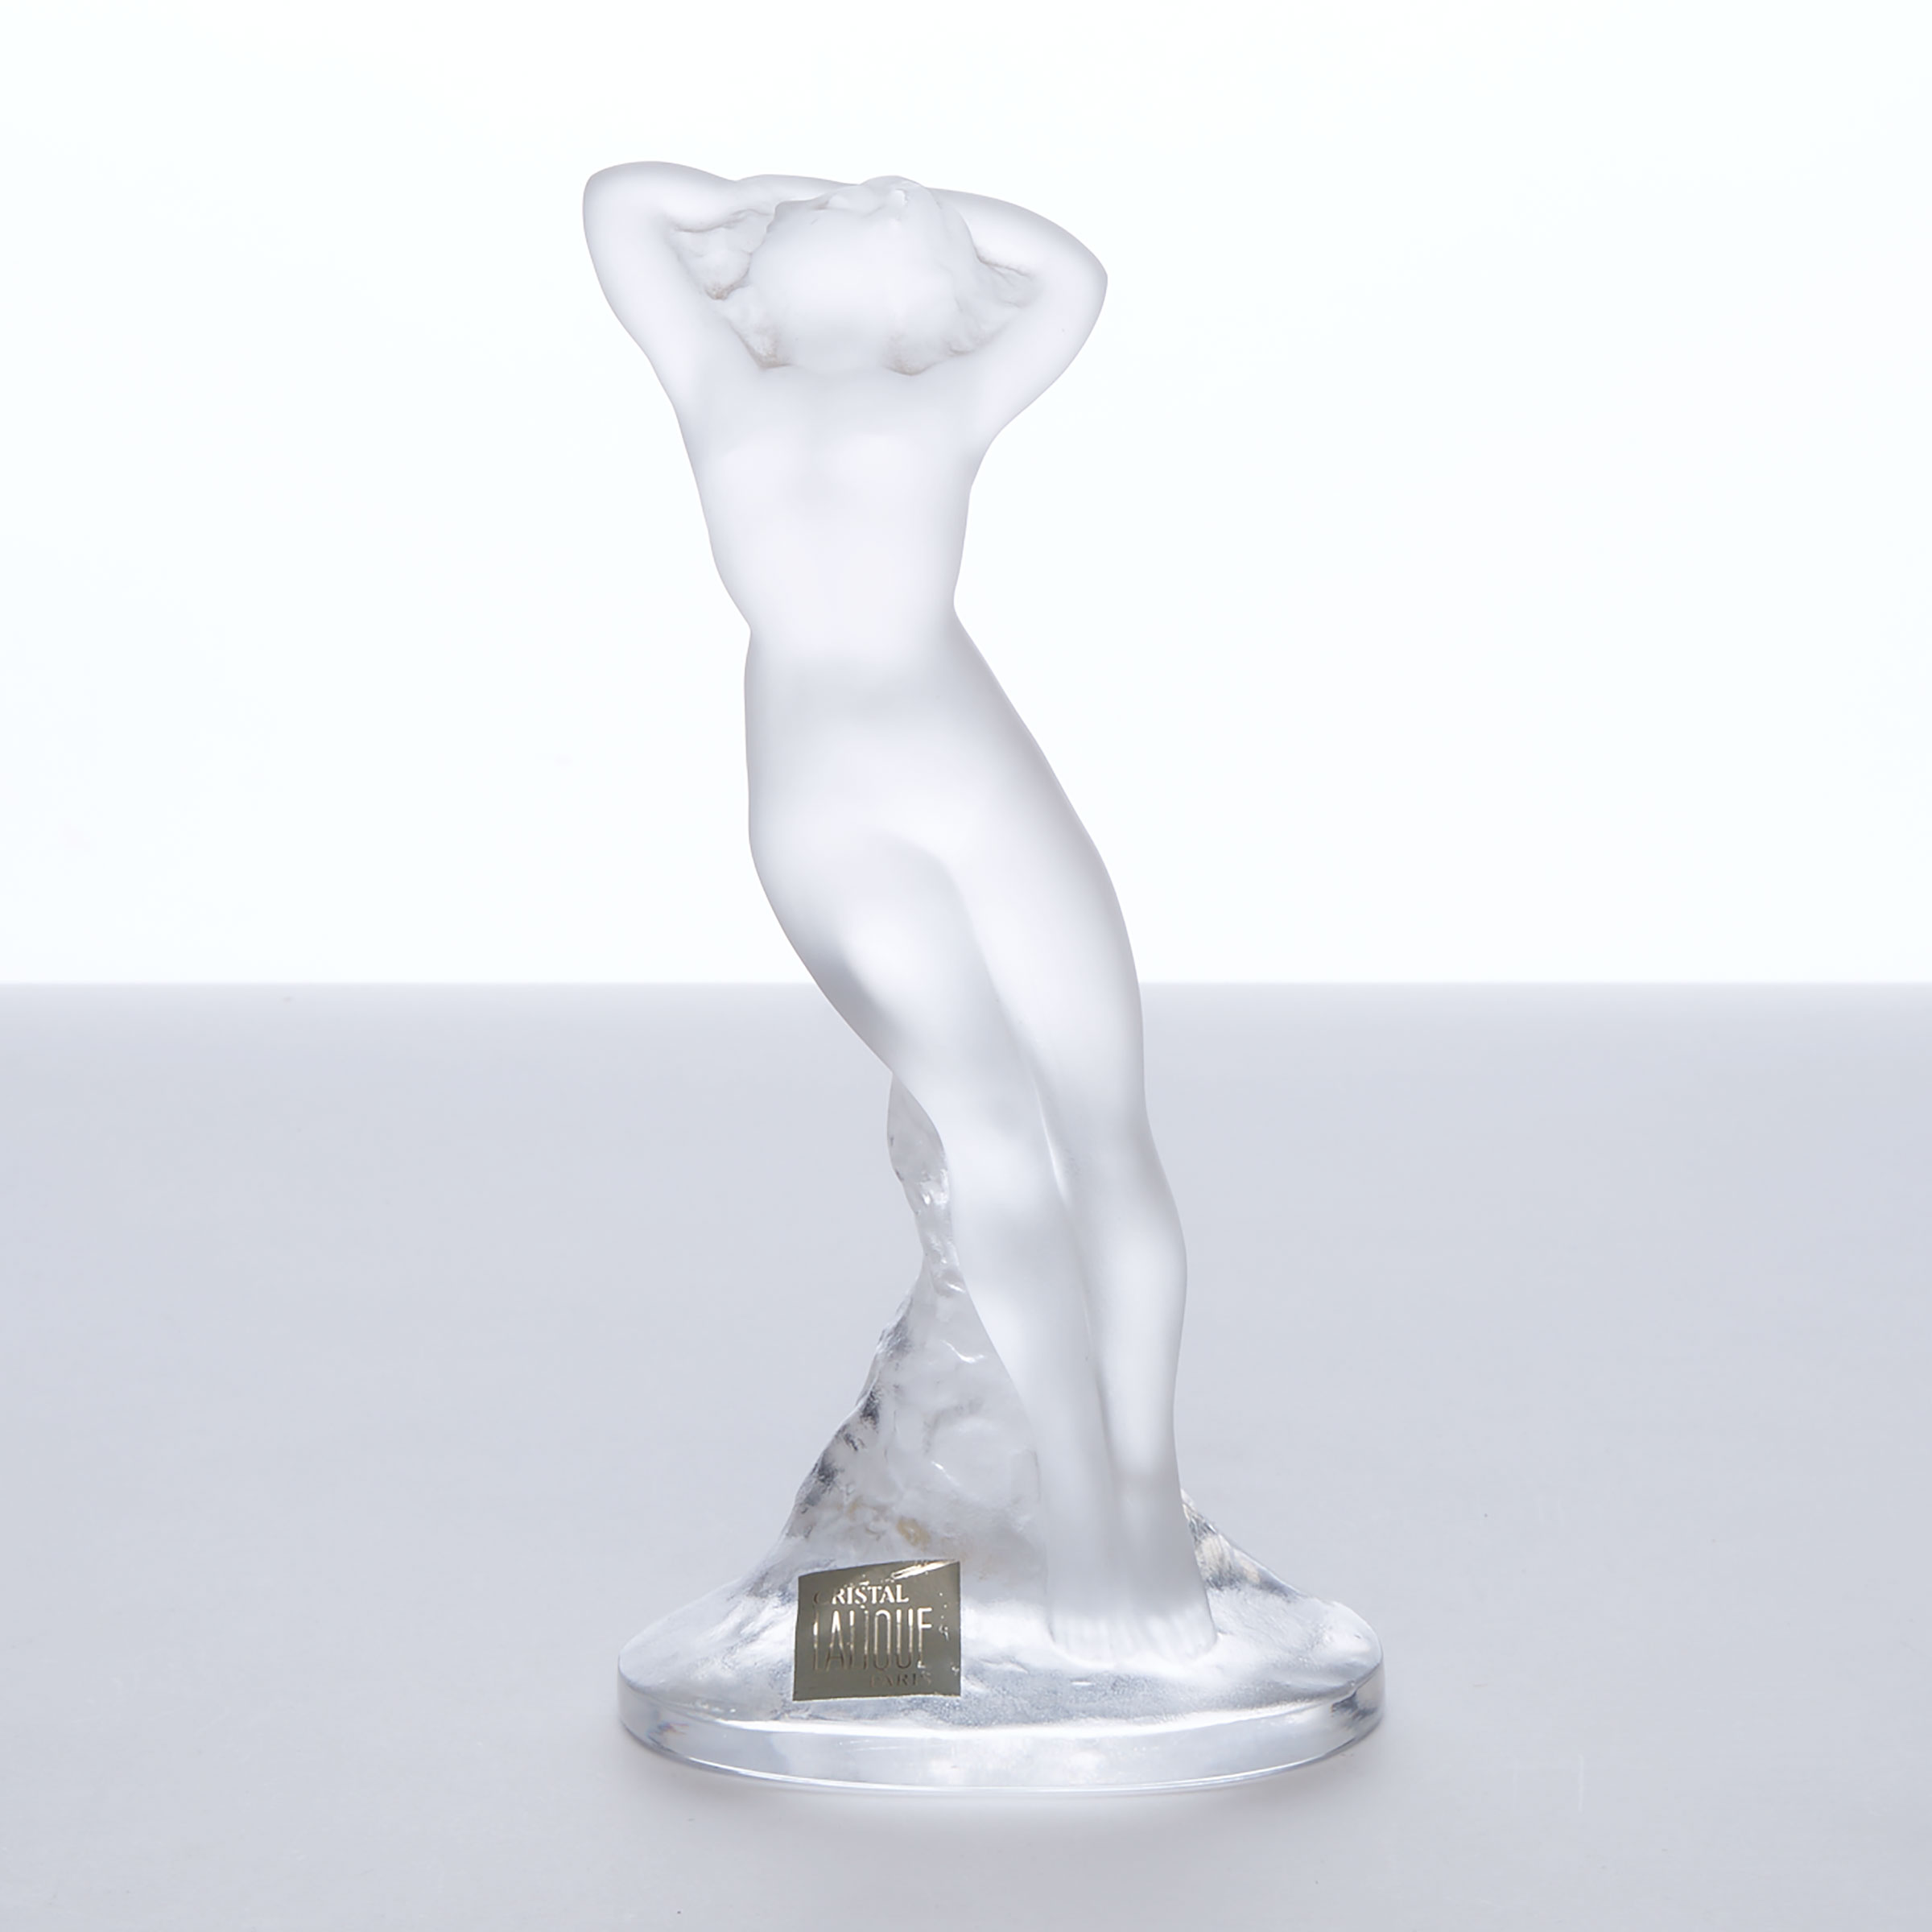 ‘Danseuse Bras Lèves’, Lalique Moulded and Frosted Glass Figure, post-1945